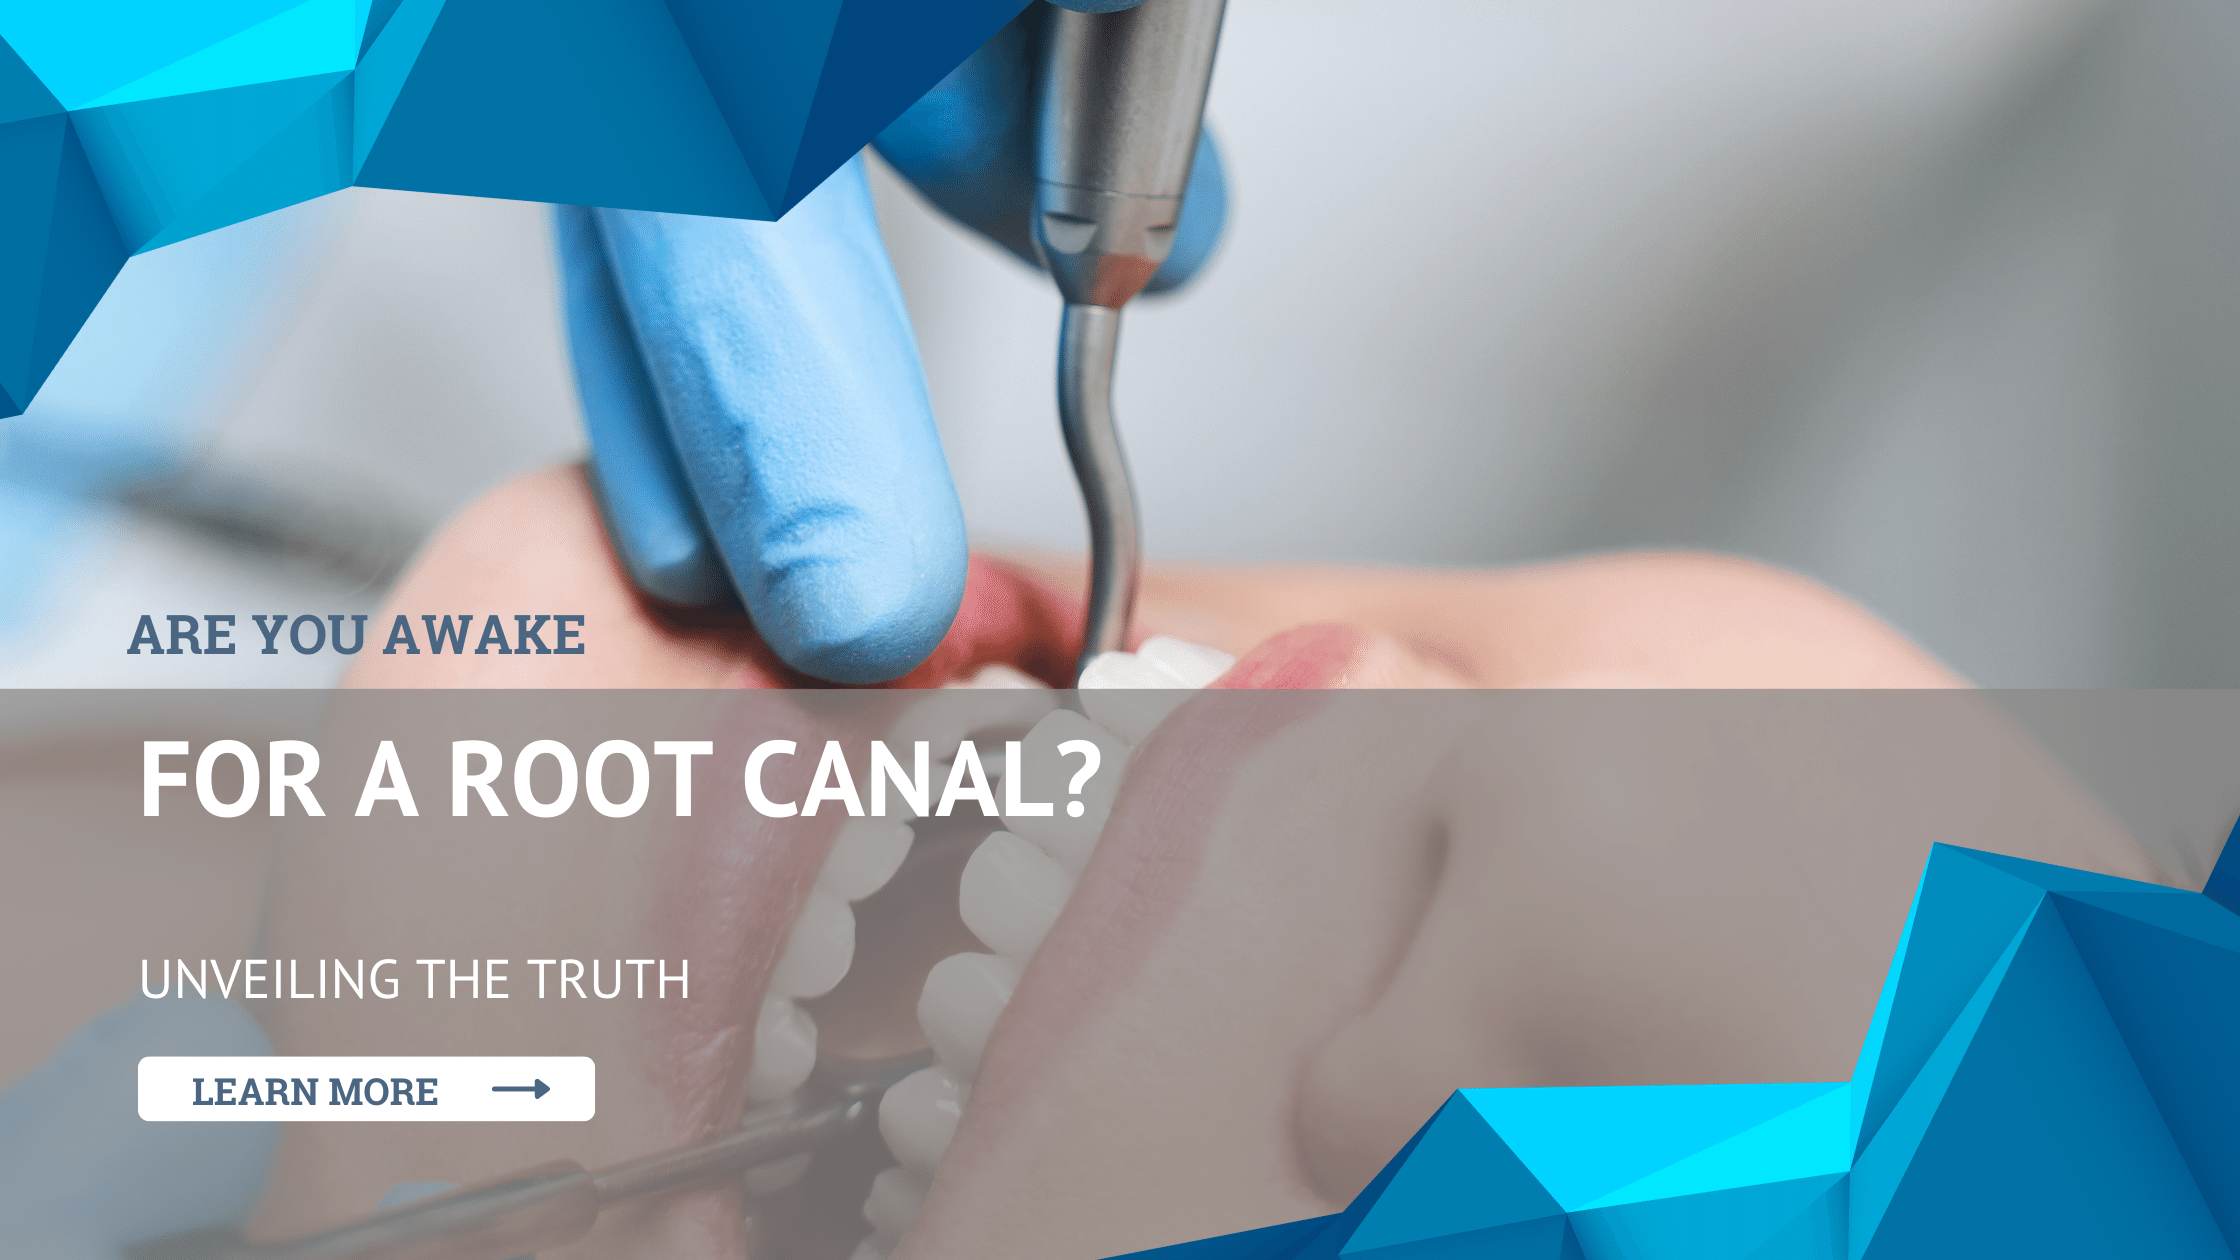 Are You Awake for a Root Canal?